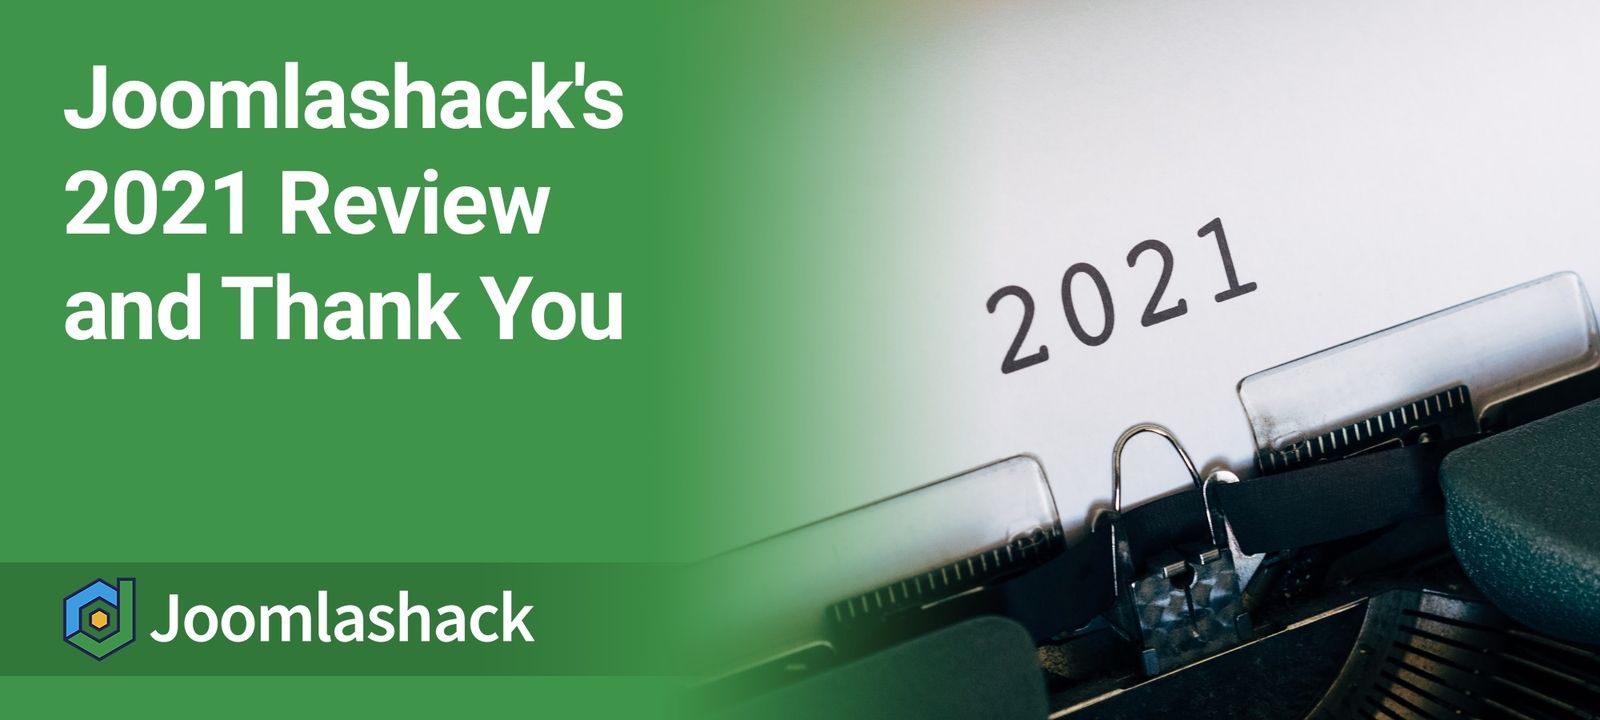 Joomlashack's 2021 Review and Thank You